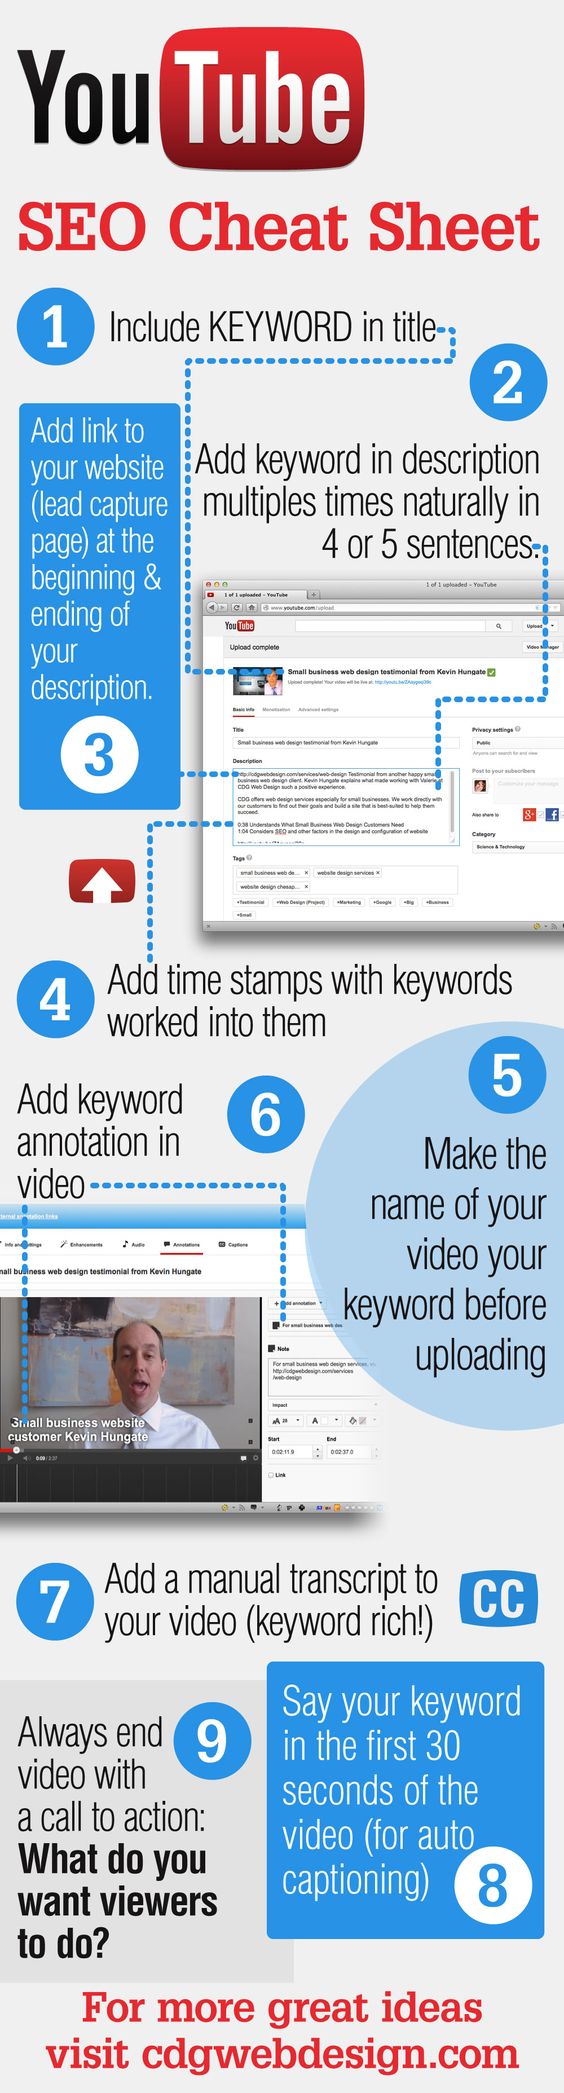 youtube SEO cheat sheet infographic -- make those youtube videos work for you!